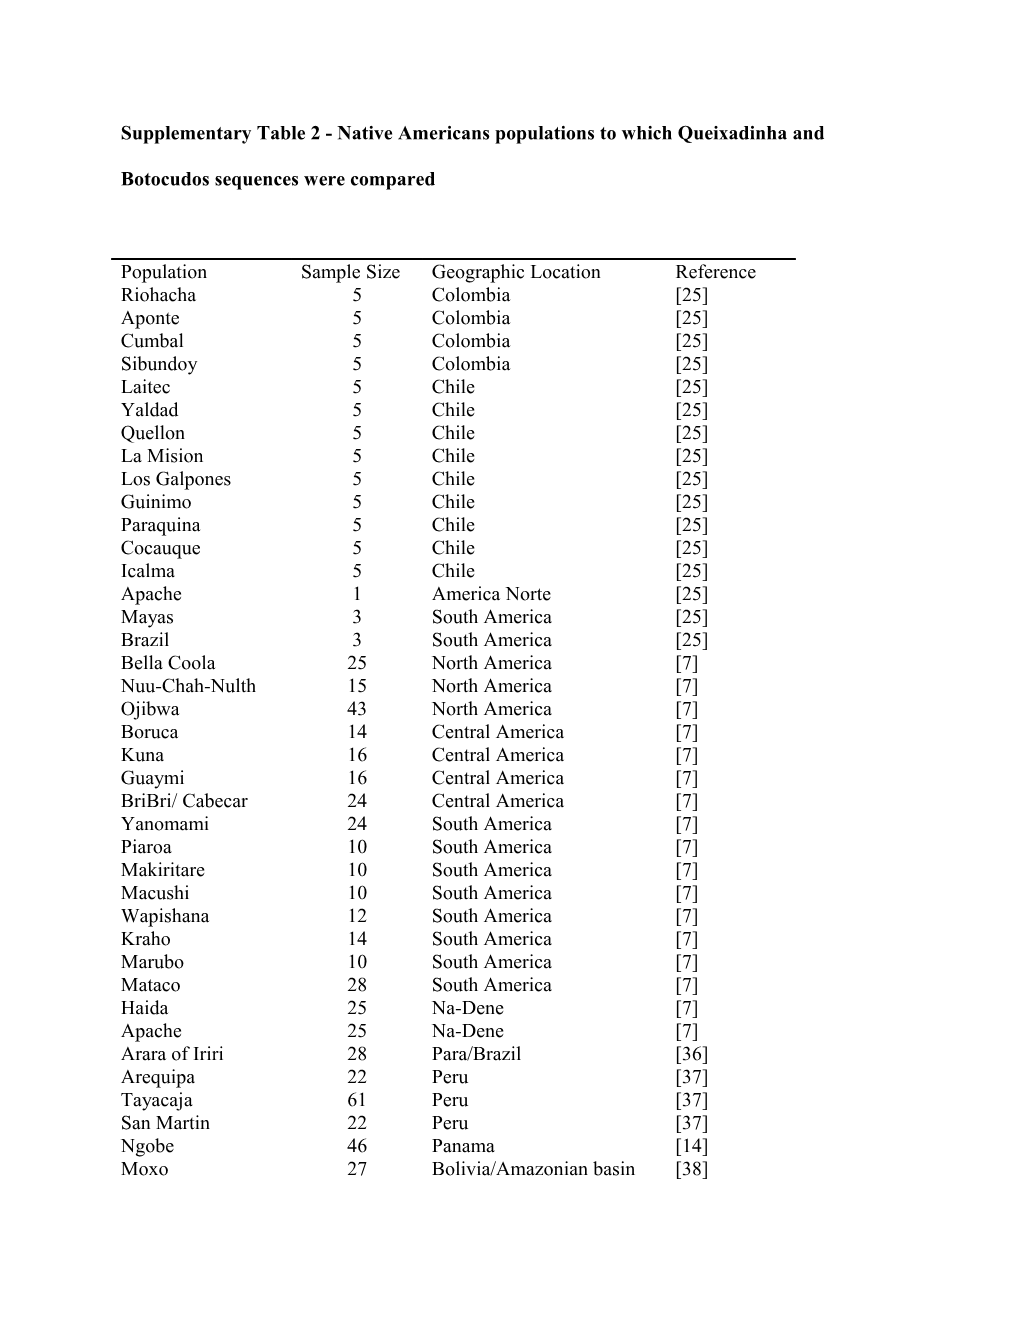 Supplementary Table 2 - Native Americans Populations to Which Queixadinha and Botocudos